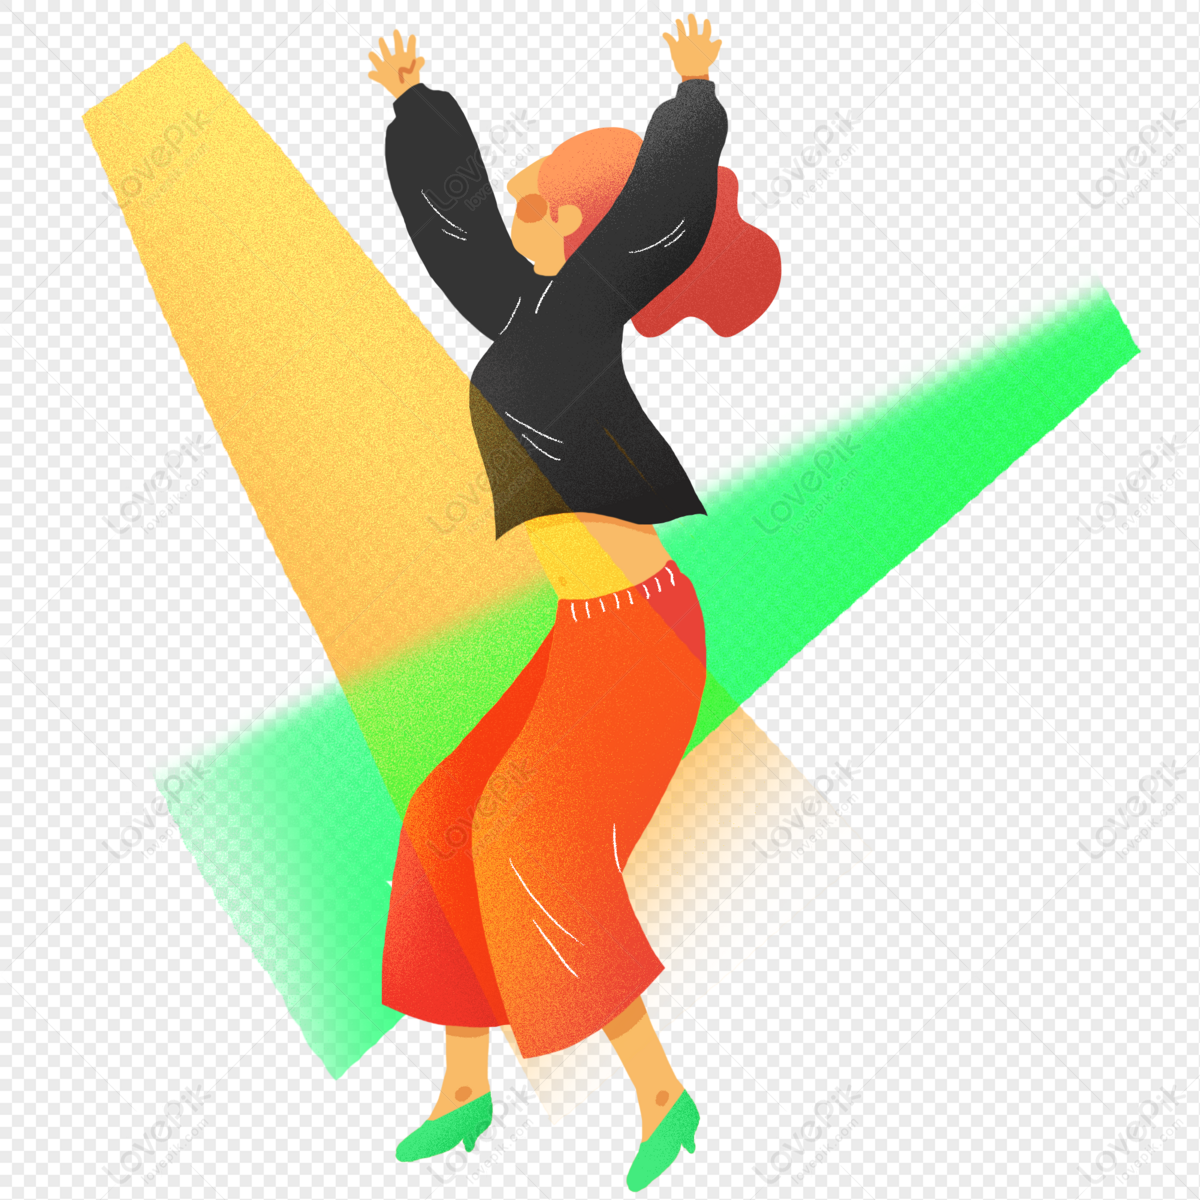 Dancing Girls At The Festival Free PNG And Clipart Image For Free Download  - Lovepik | 401311029